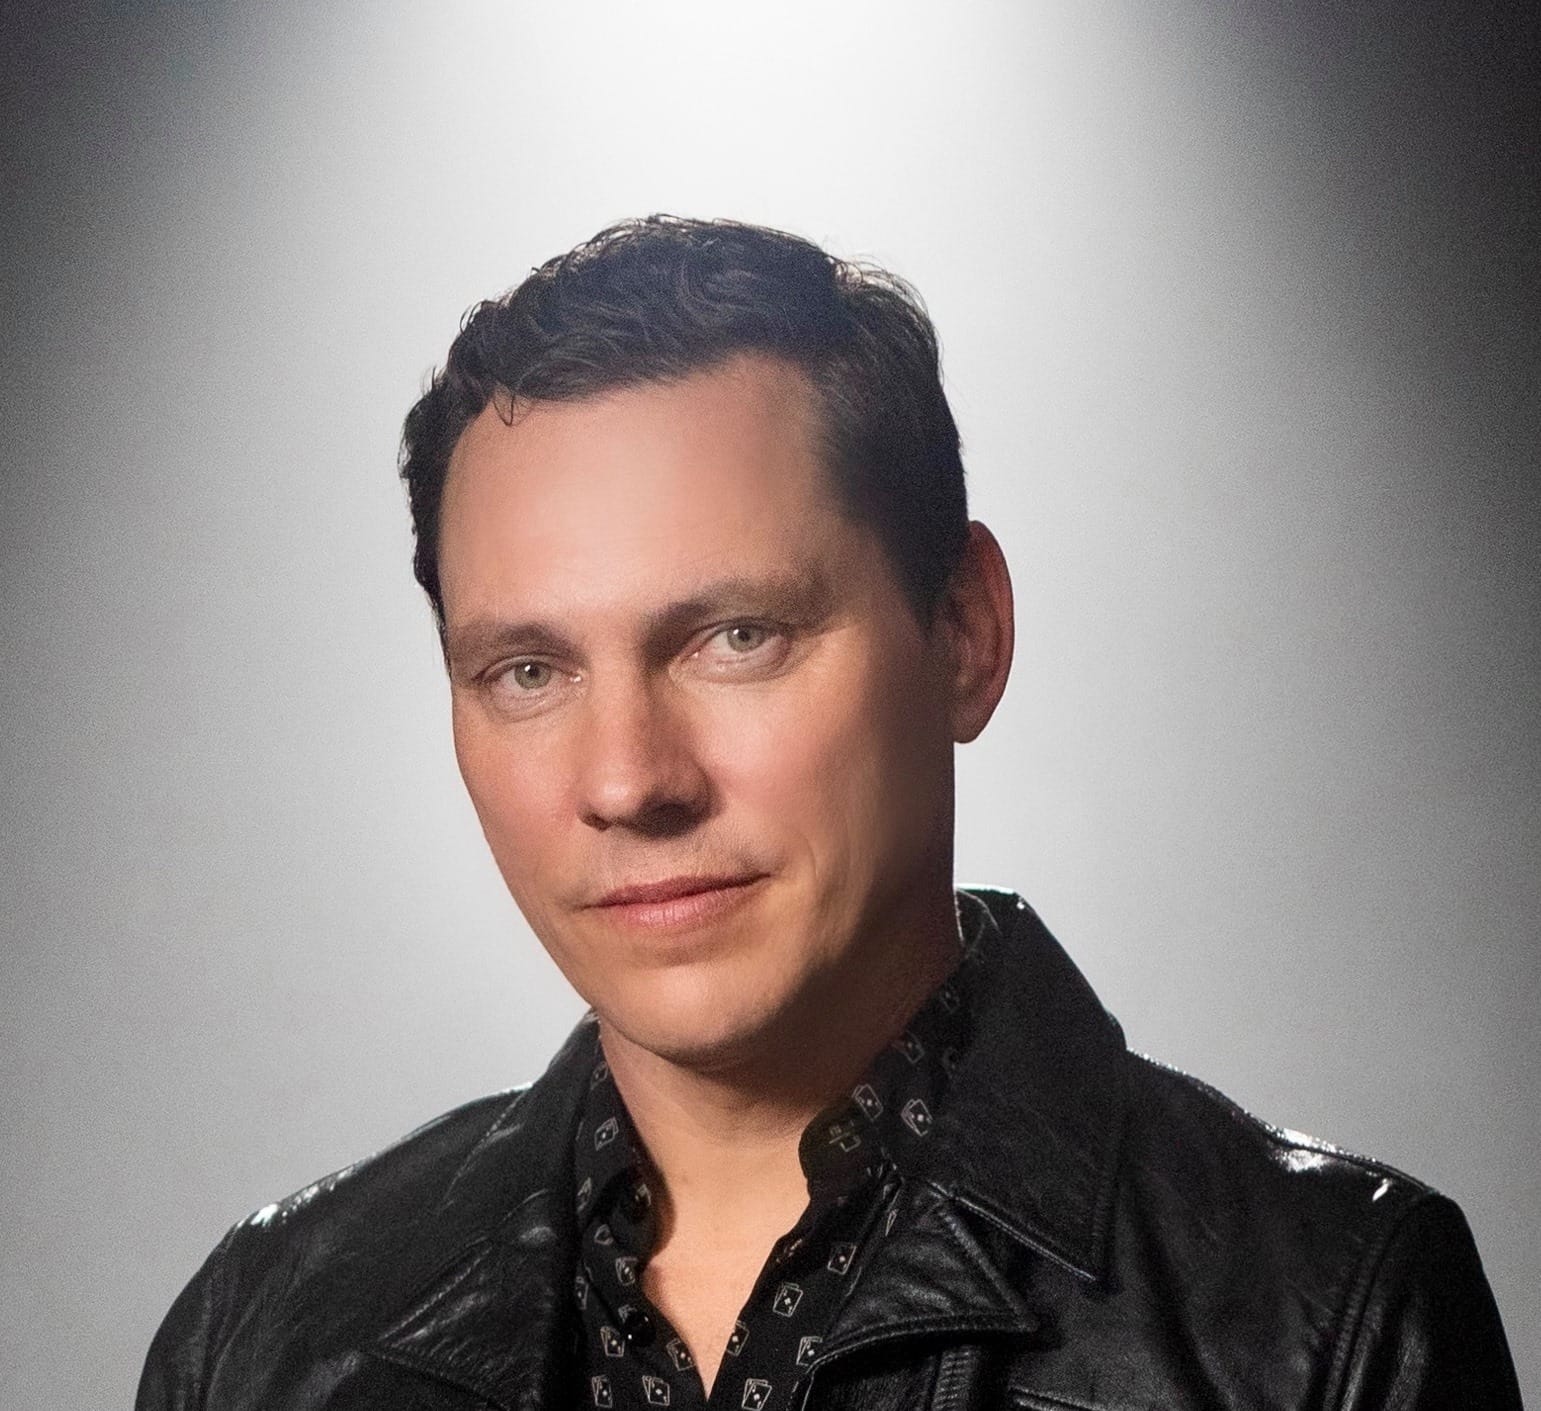 253467186 442089667275217 1281616422690323211 n - The Rise of Tiësto: Uncovering the Accomplishments of an EDM Legend